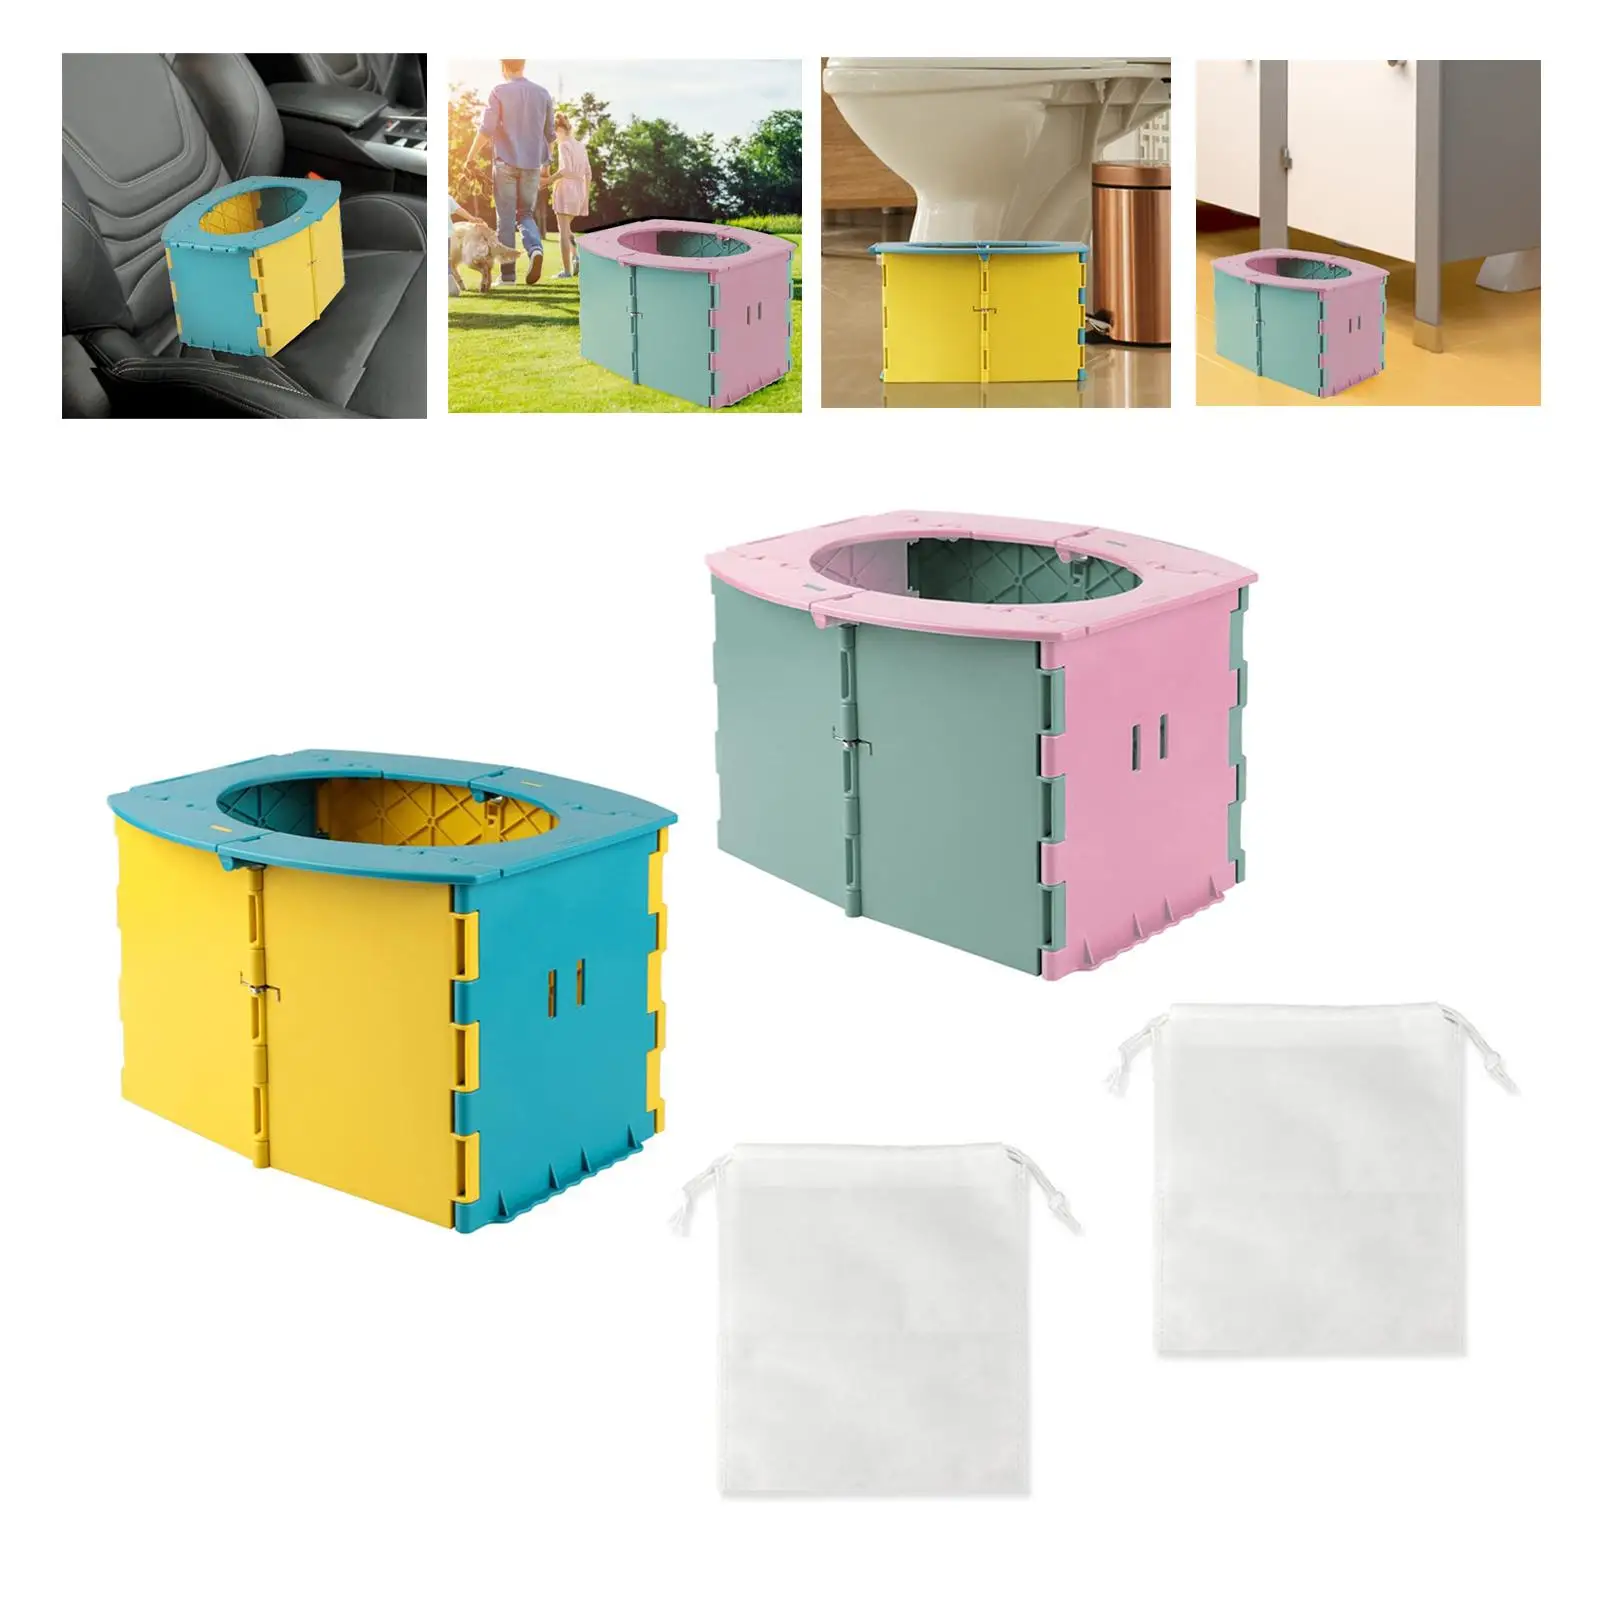 Lightweight Travel Toilet Potty Chair Car Toilet for Travel Hiking